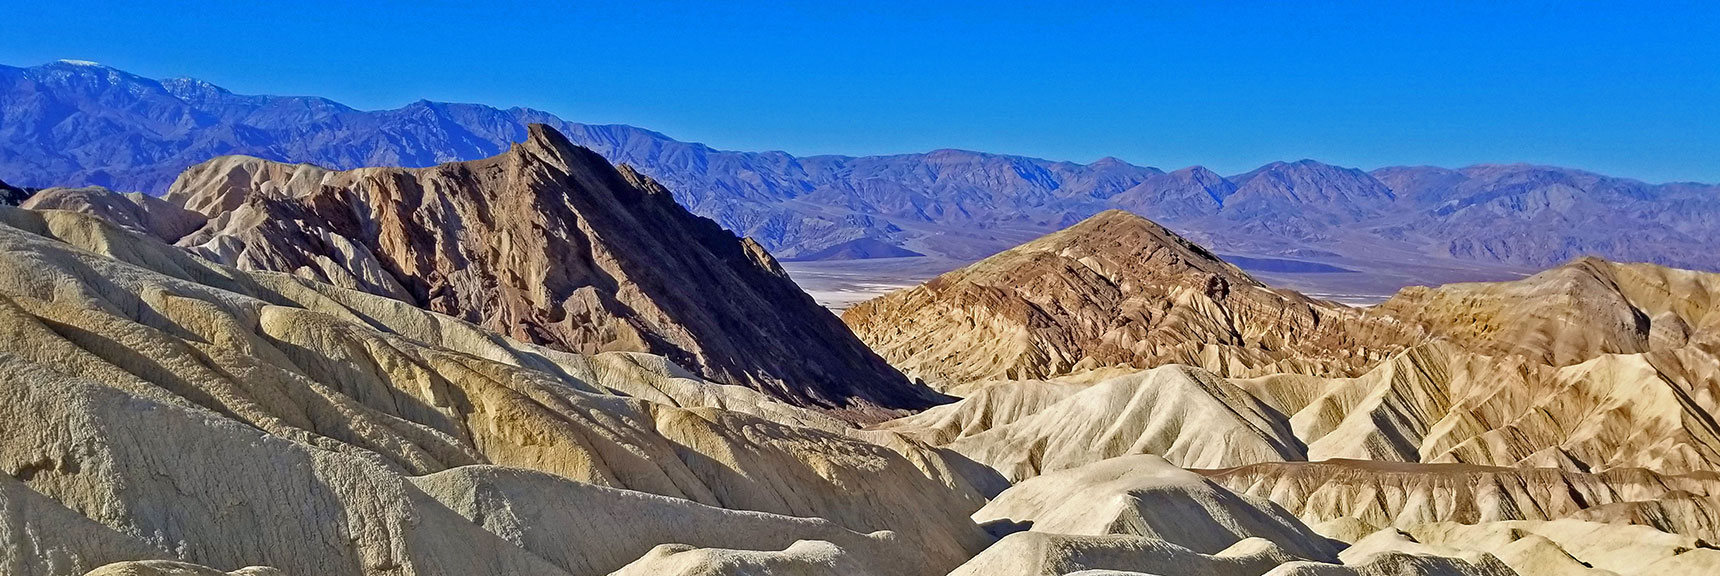 Golden Hills and West Side of Death Valley Viewed from the Base of Manly Beacon. | Golden Canyon to Zabriskie Point | Death Valley National Park, California